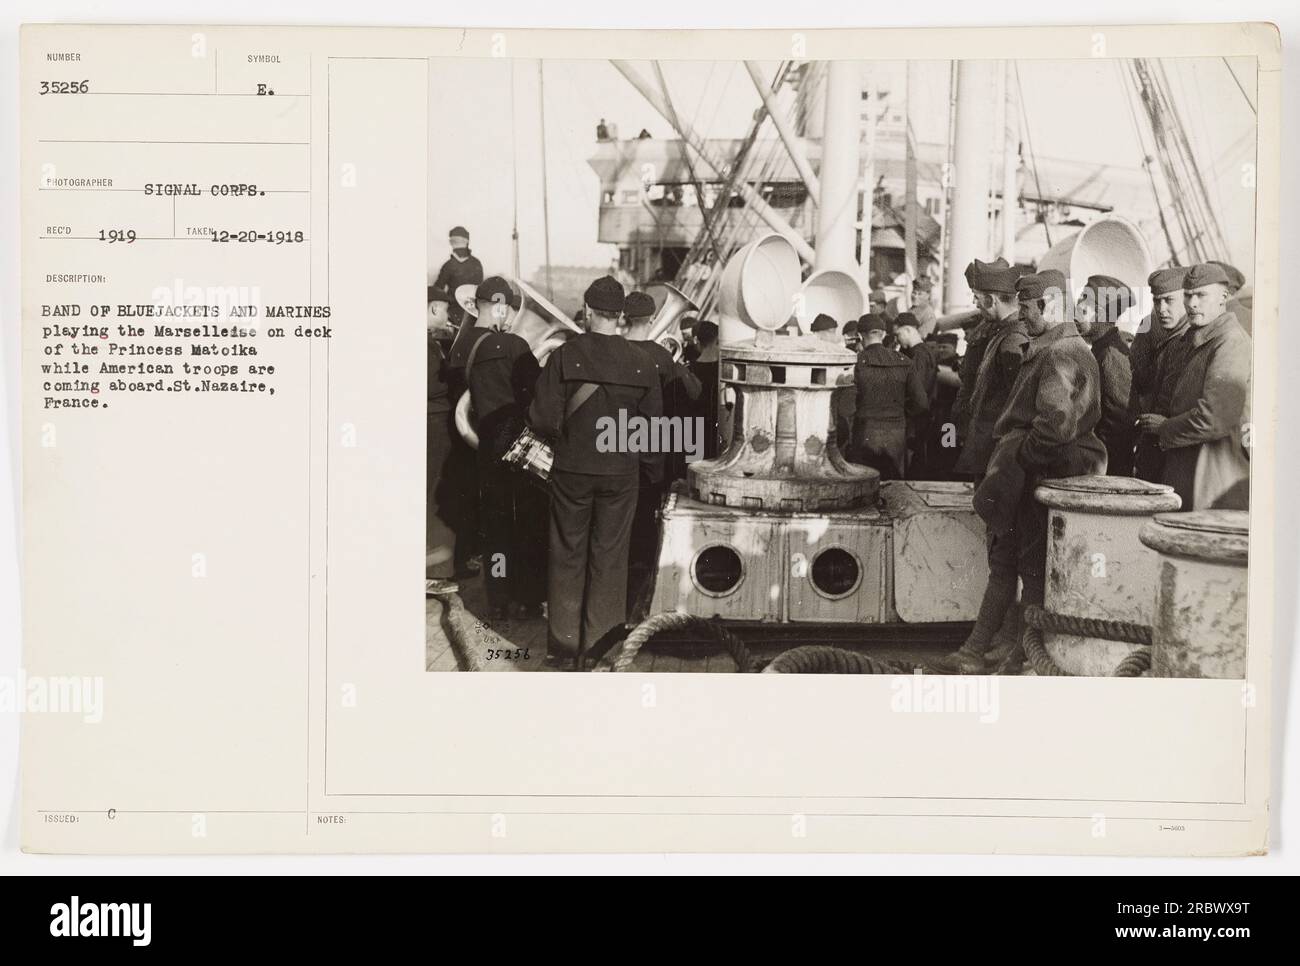 Bluejackets and Marines play the Marselleise on the deck of the Princess Matoika as American troops board the ship in St. Nazaire, France in December 1918. This photograph, numbered 35256, was taken by a Signal Corps photographer and is part of a collection known as Veld 1919. Stock Photo